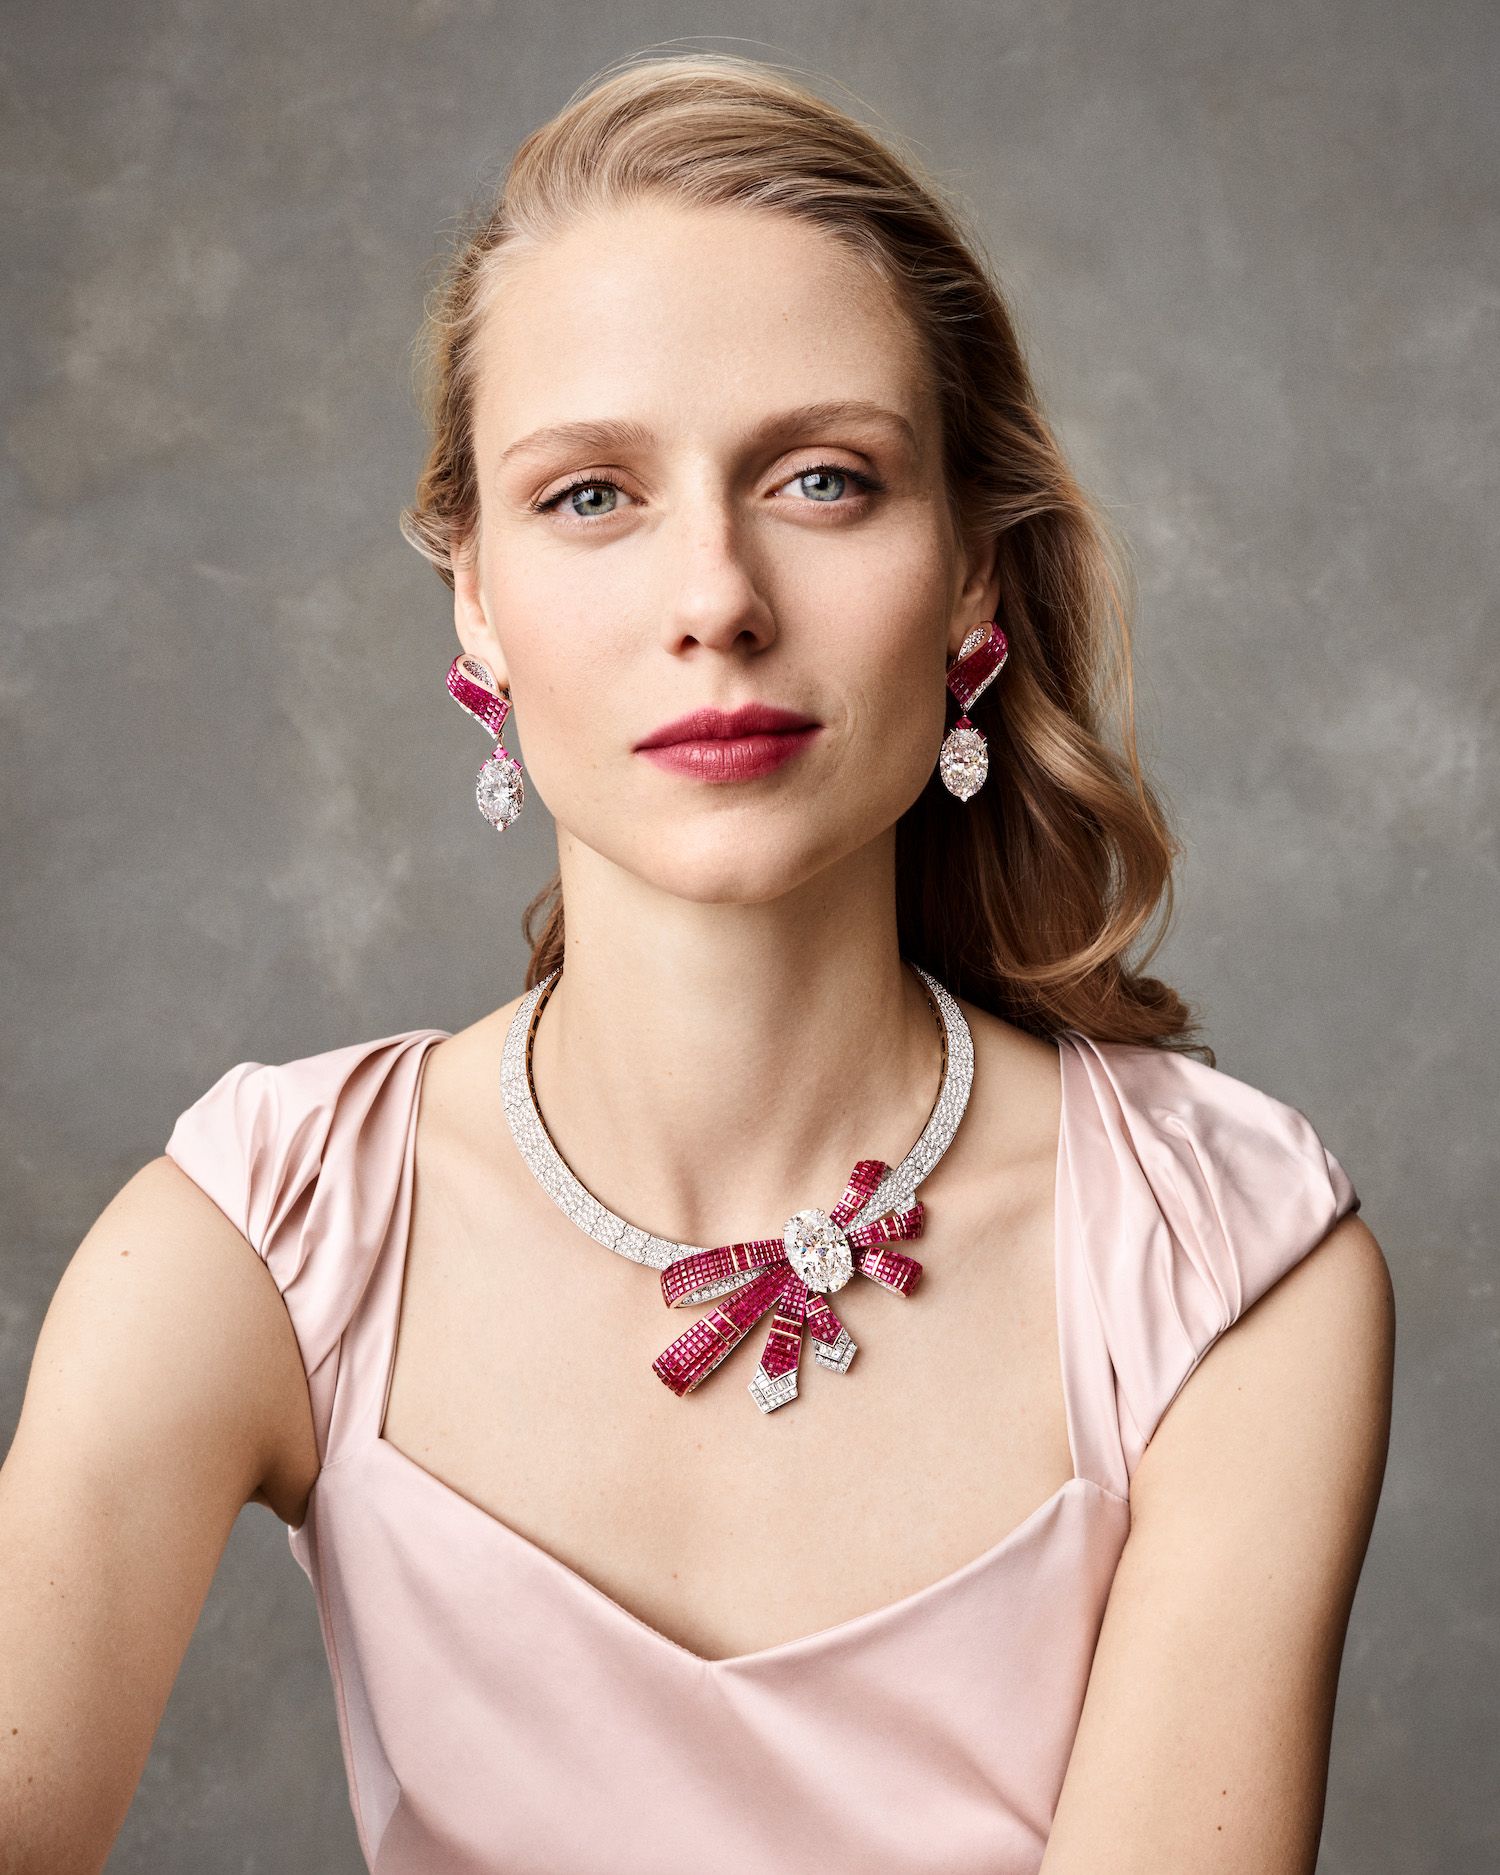 De Beers has unveiled its latest high jewellery ()